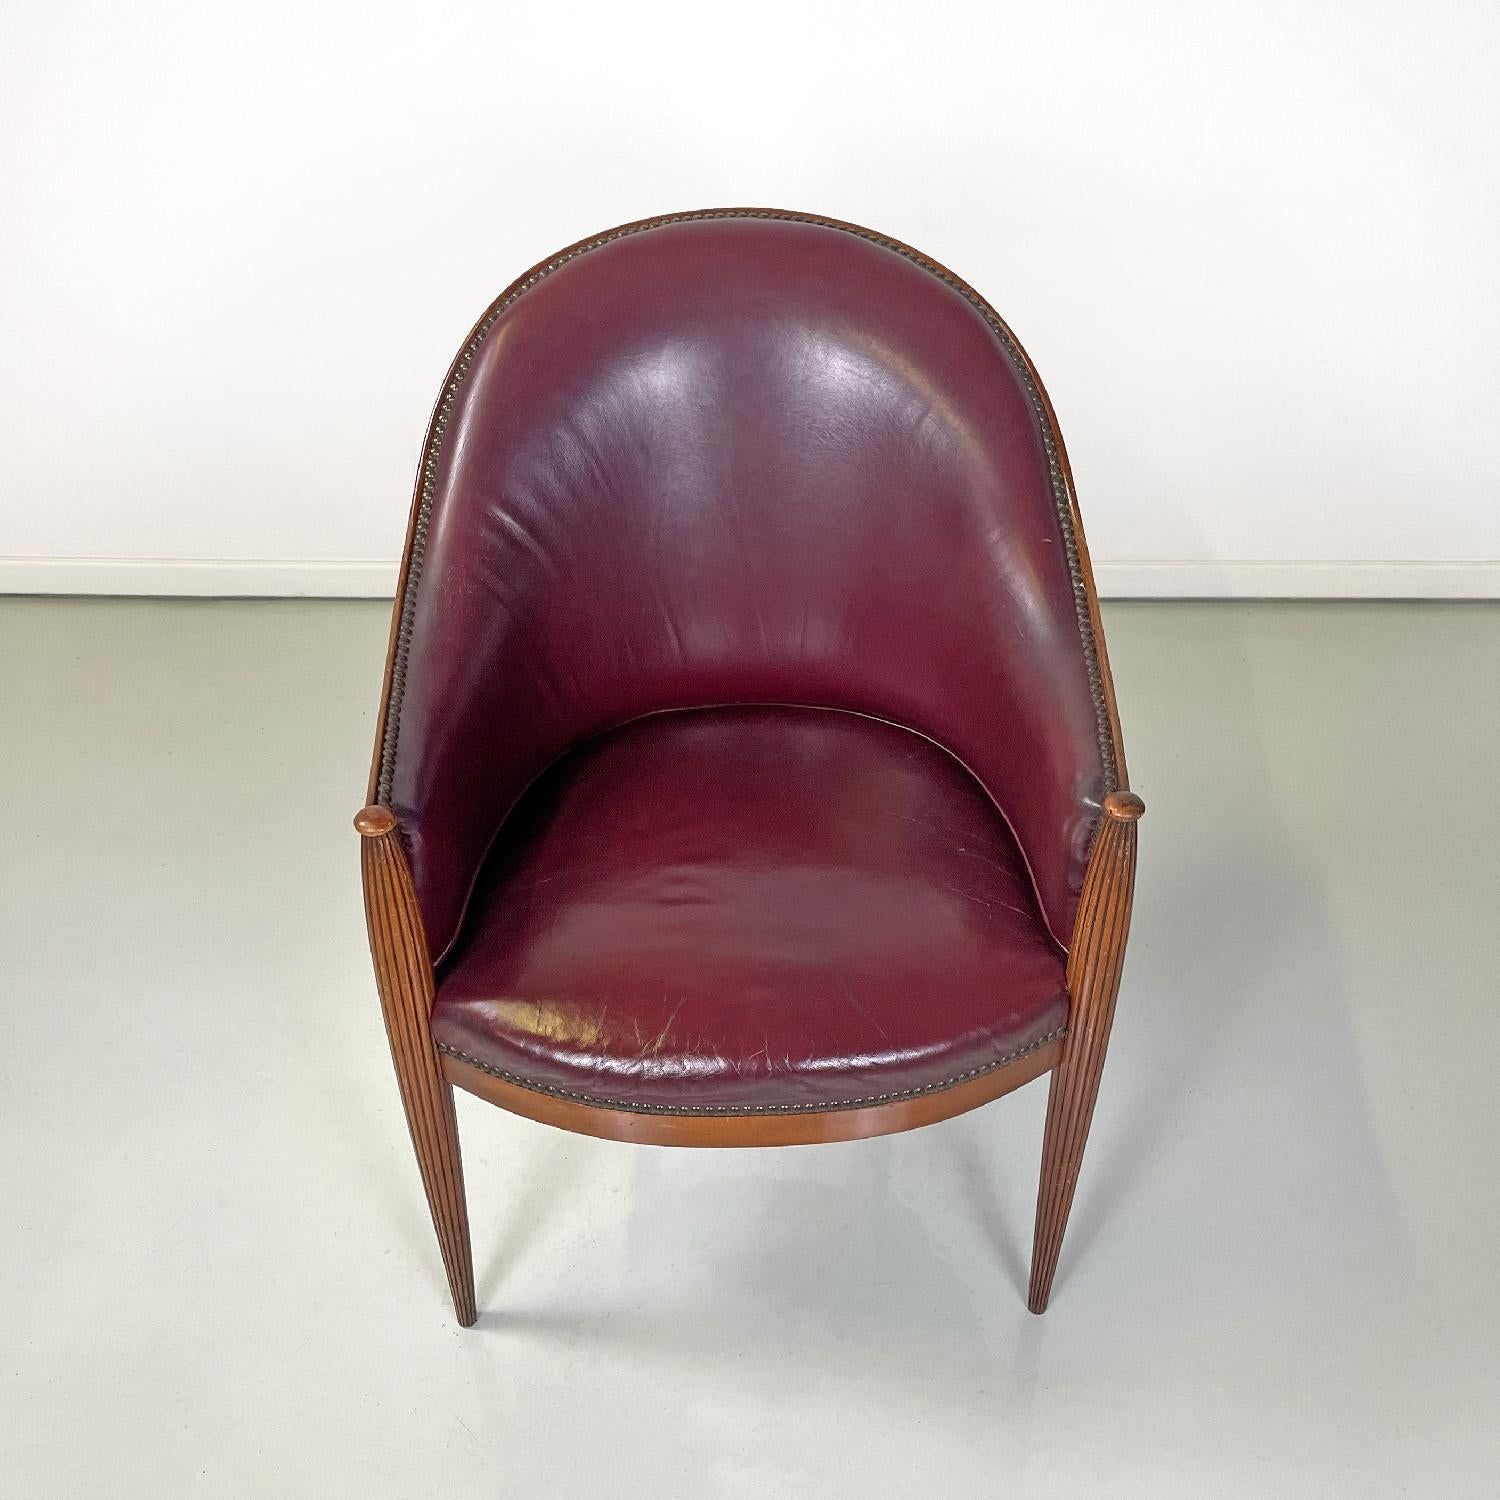 Mid-20th Century Italian mid-century modern wine-colored leather armchair with studs, 1950s For Sale